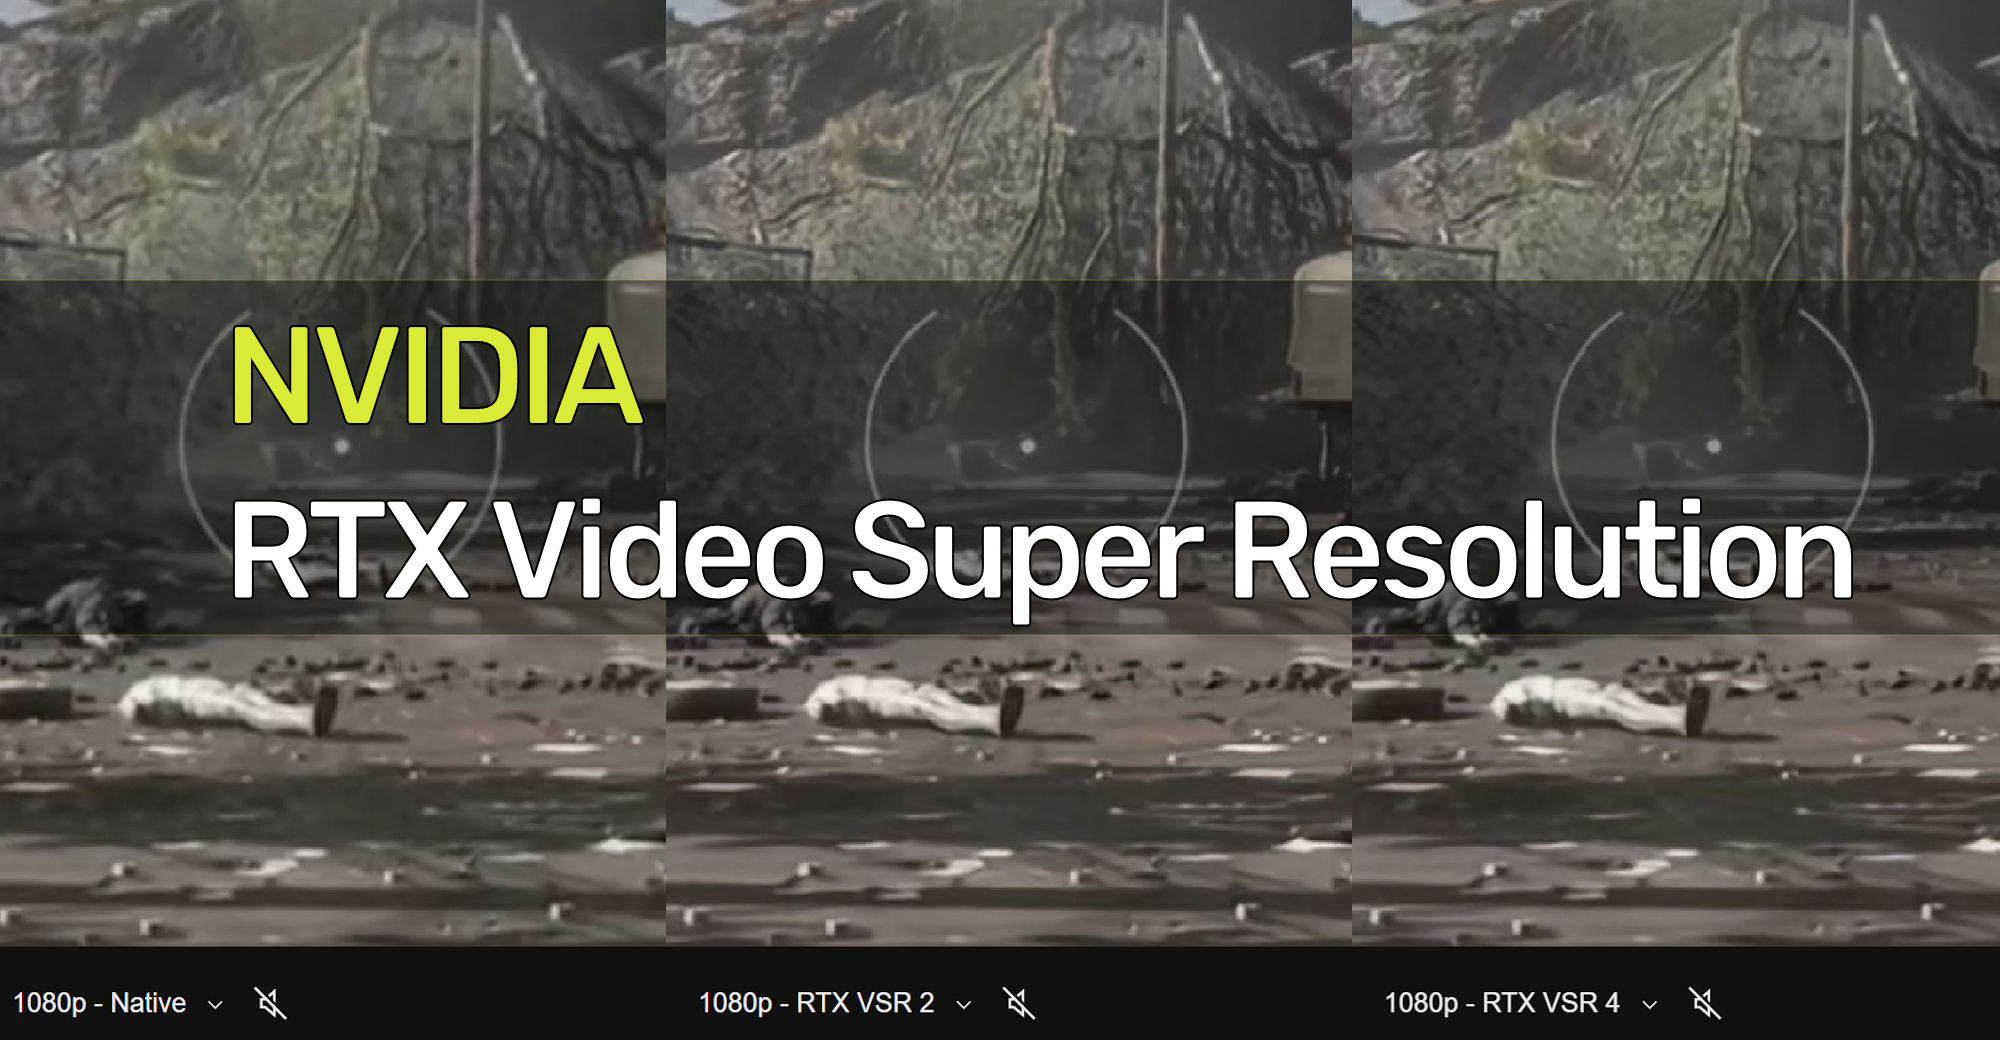 NVIDIA launches RTX Video Super Resolution technology